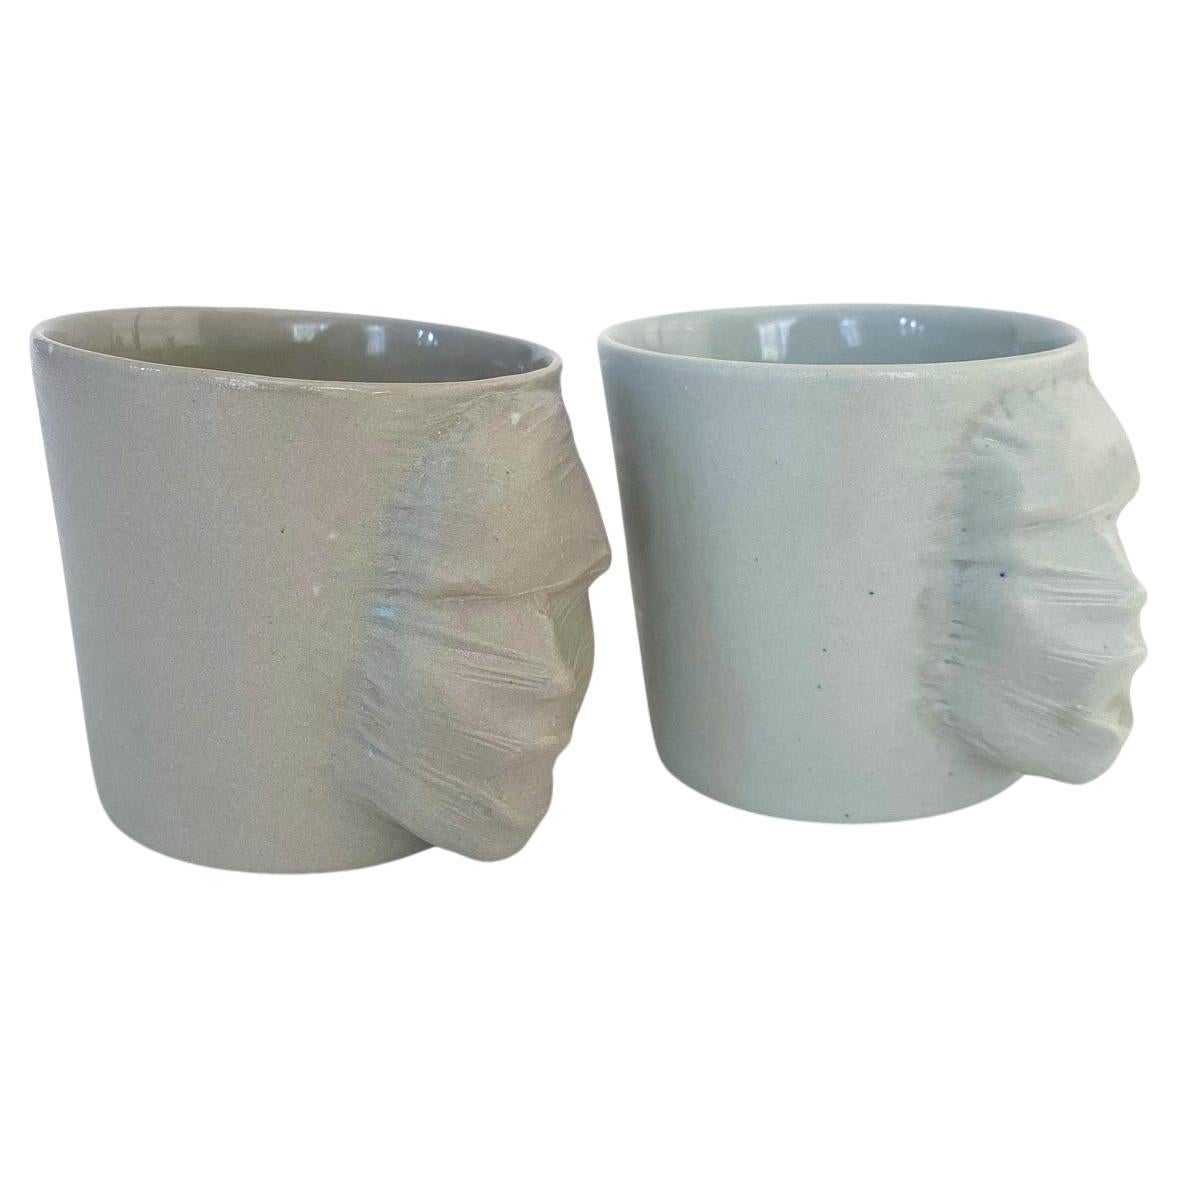 Sculptural Porcelain Cups Set of 2 by Hulya Sozer, Silhouette, Mink and Ice Blue For Sale